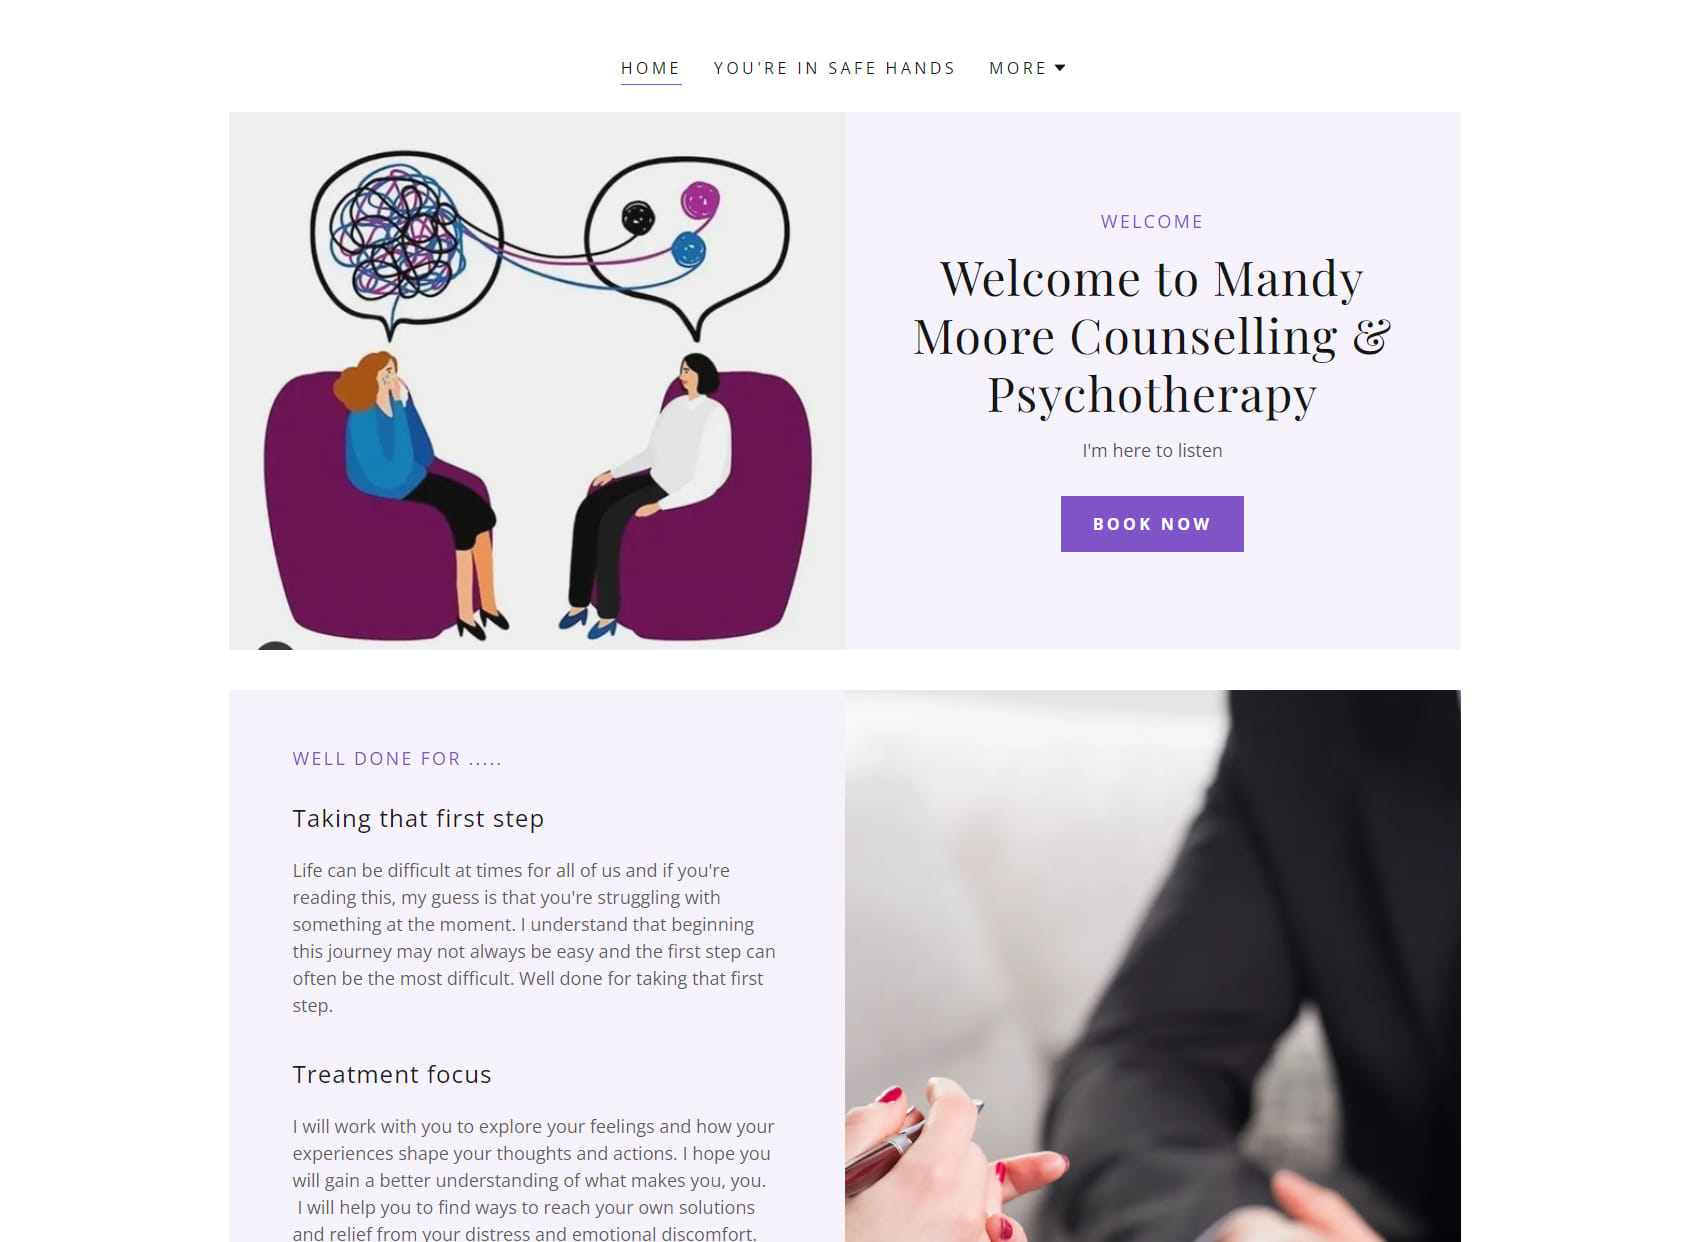 Mandy Moore Counselling & Psychotherapy Service